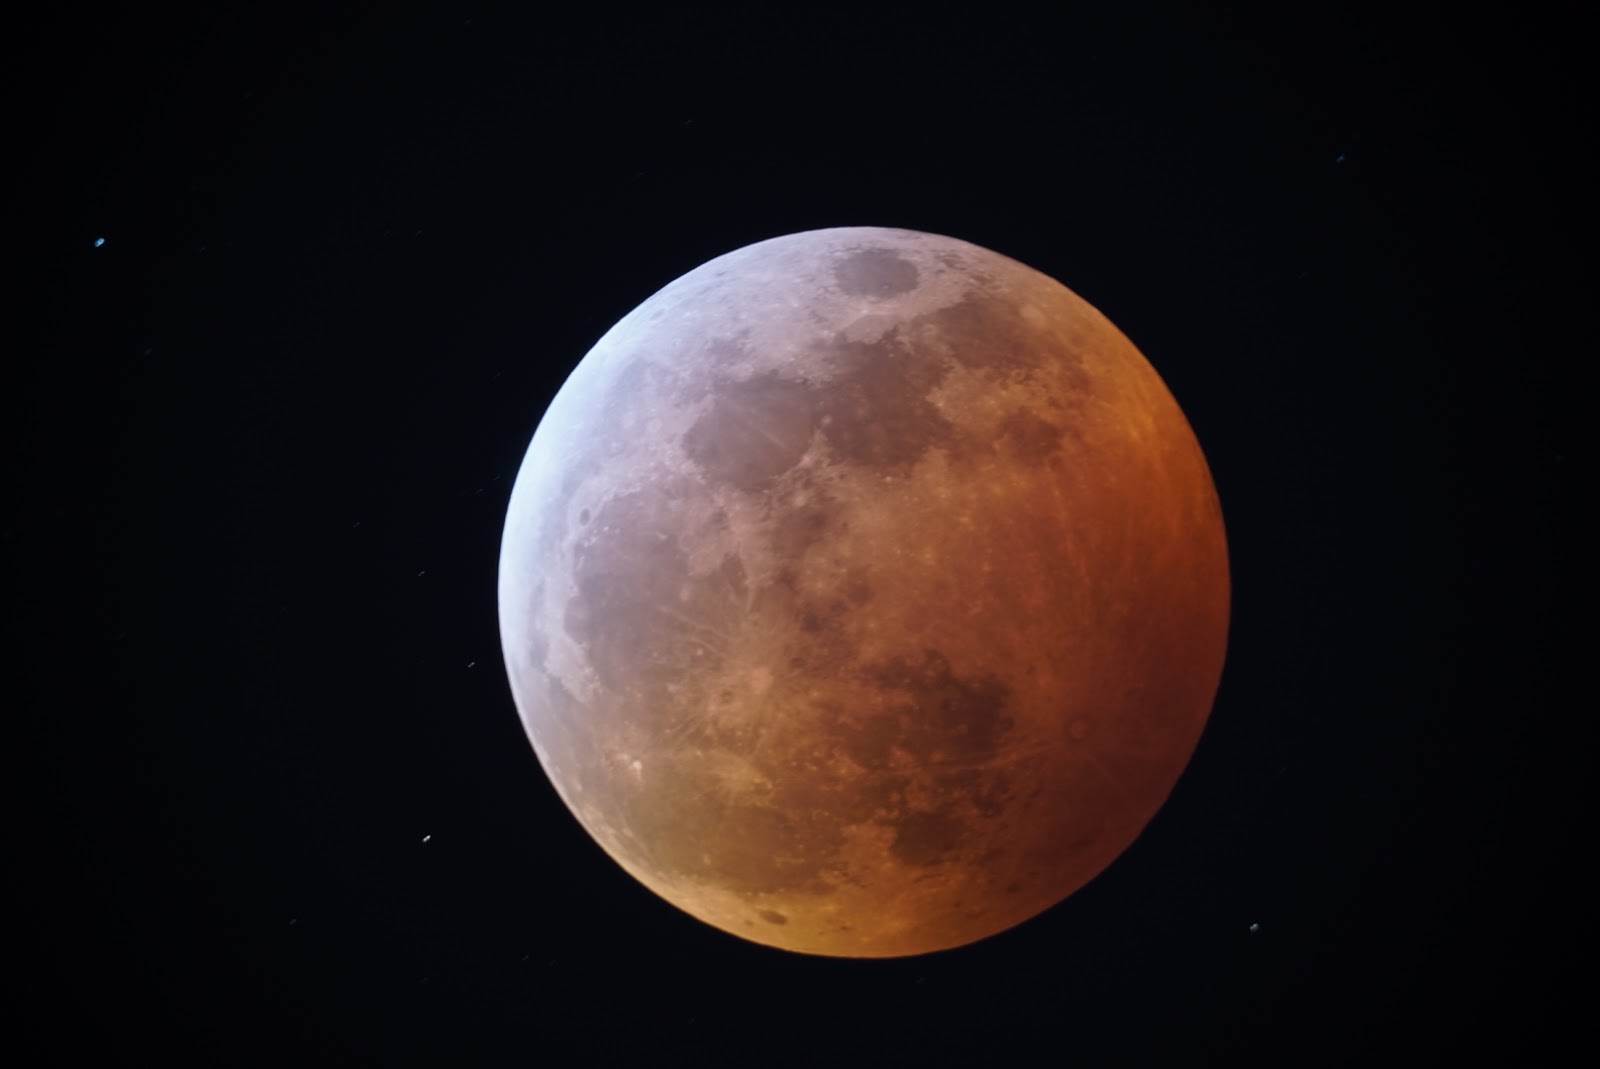 Image courtesy of Justin Foley, Mars 2020 Systems Engineer at the NASA Jet Propulsion Laboratory. Blood Moon Lunar Eclipse - Justin Foley